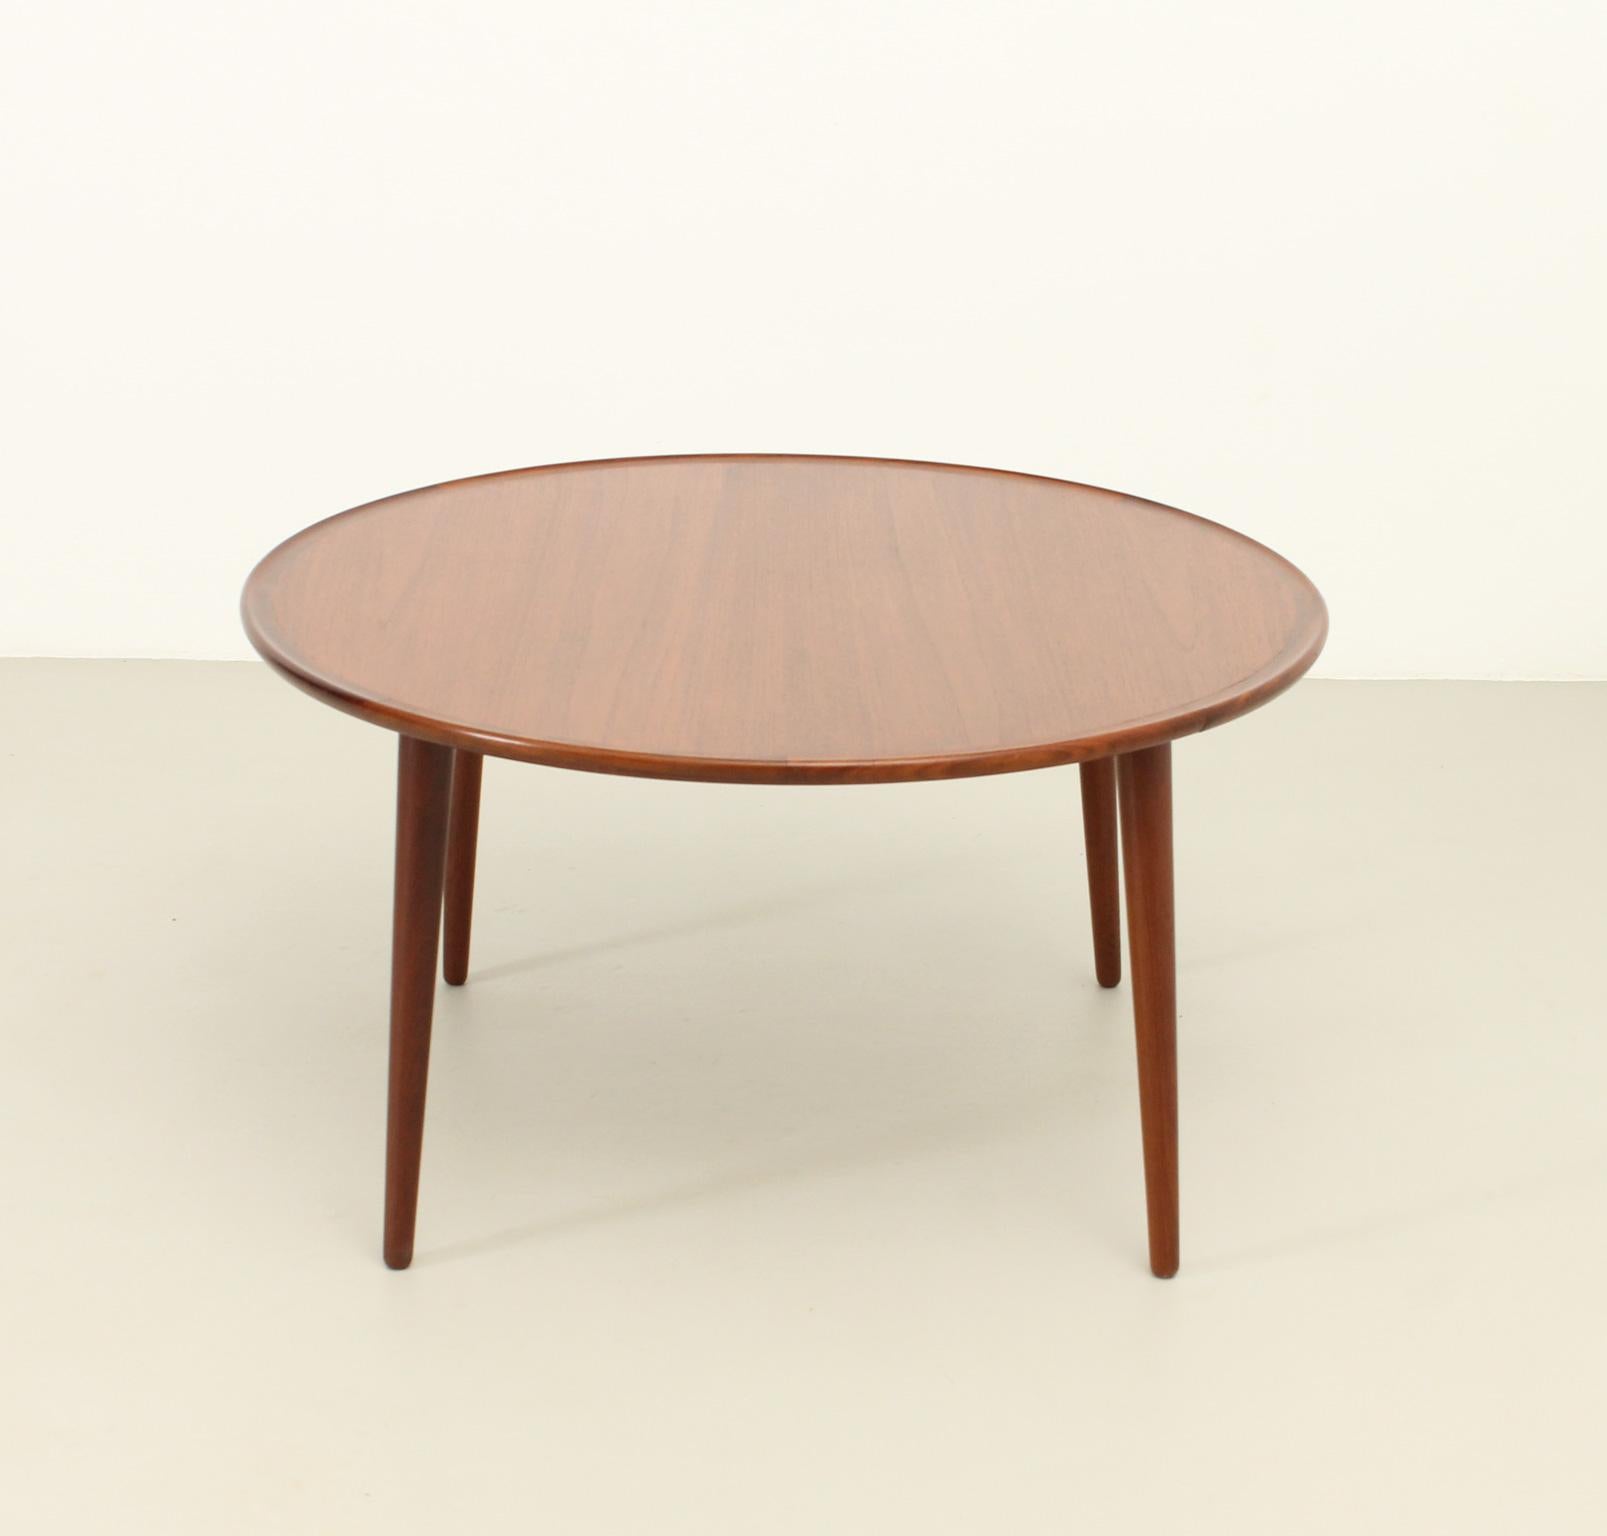 Round Coffee Table in Teak Wood by BC Møbler, Denmark, 1960's For Sale 4